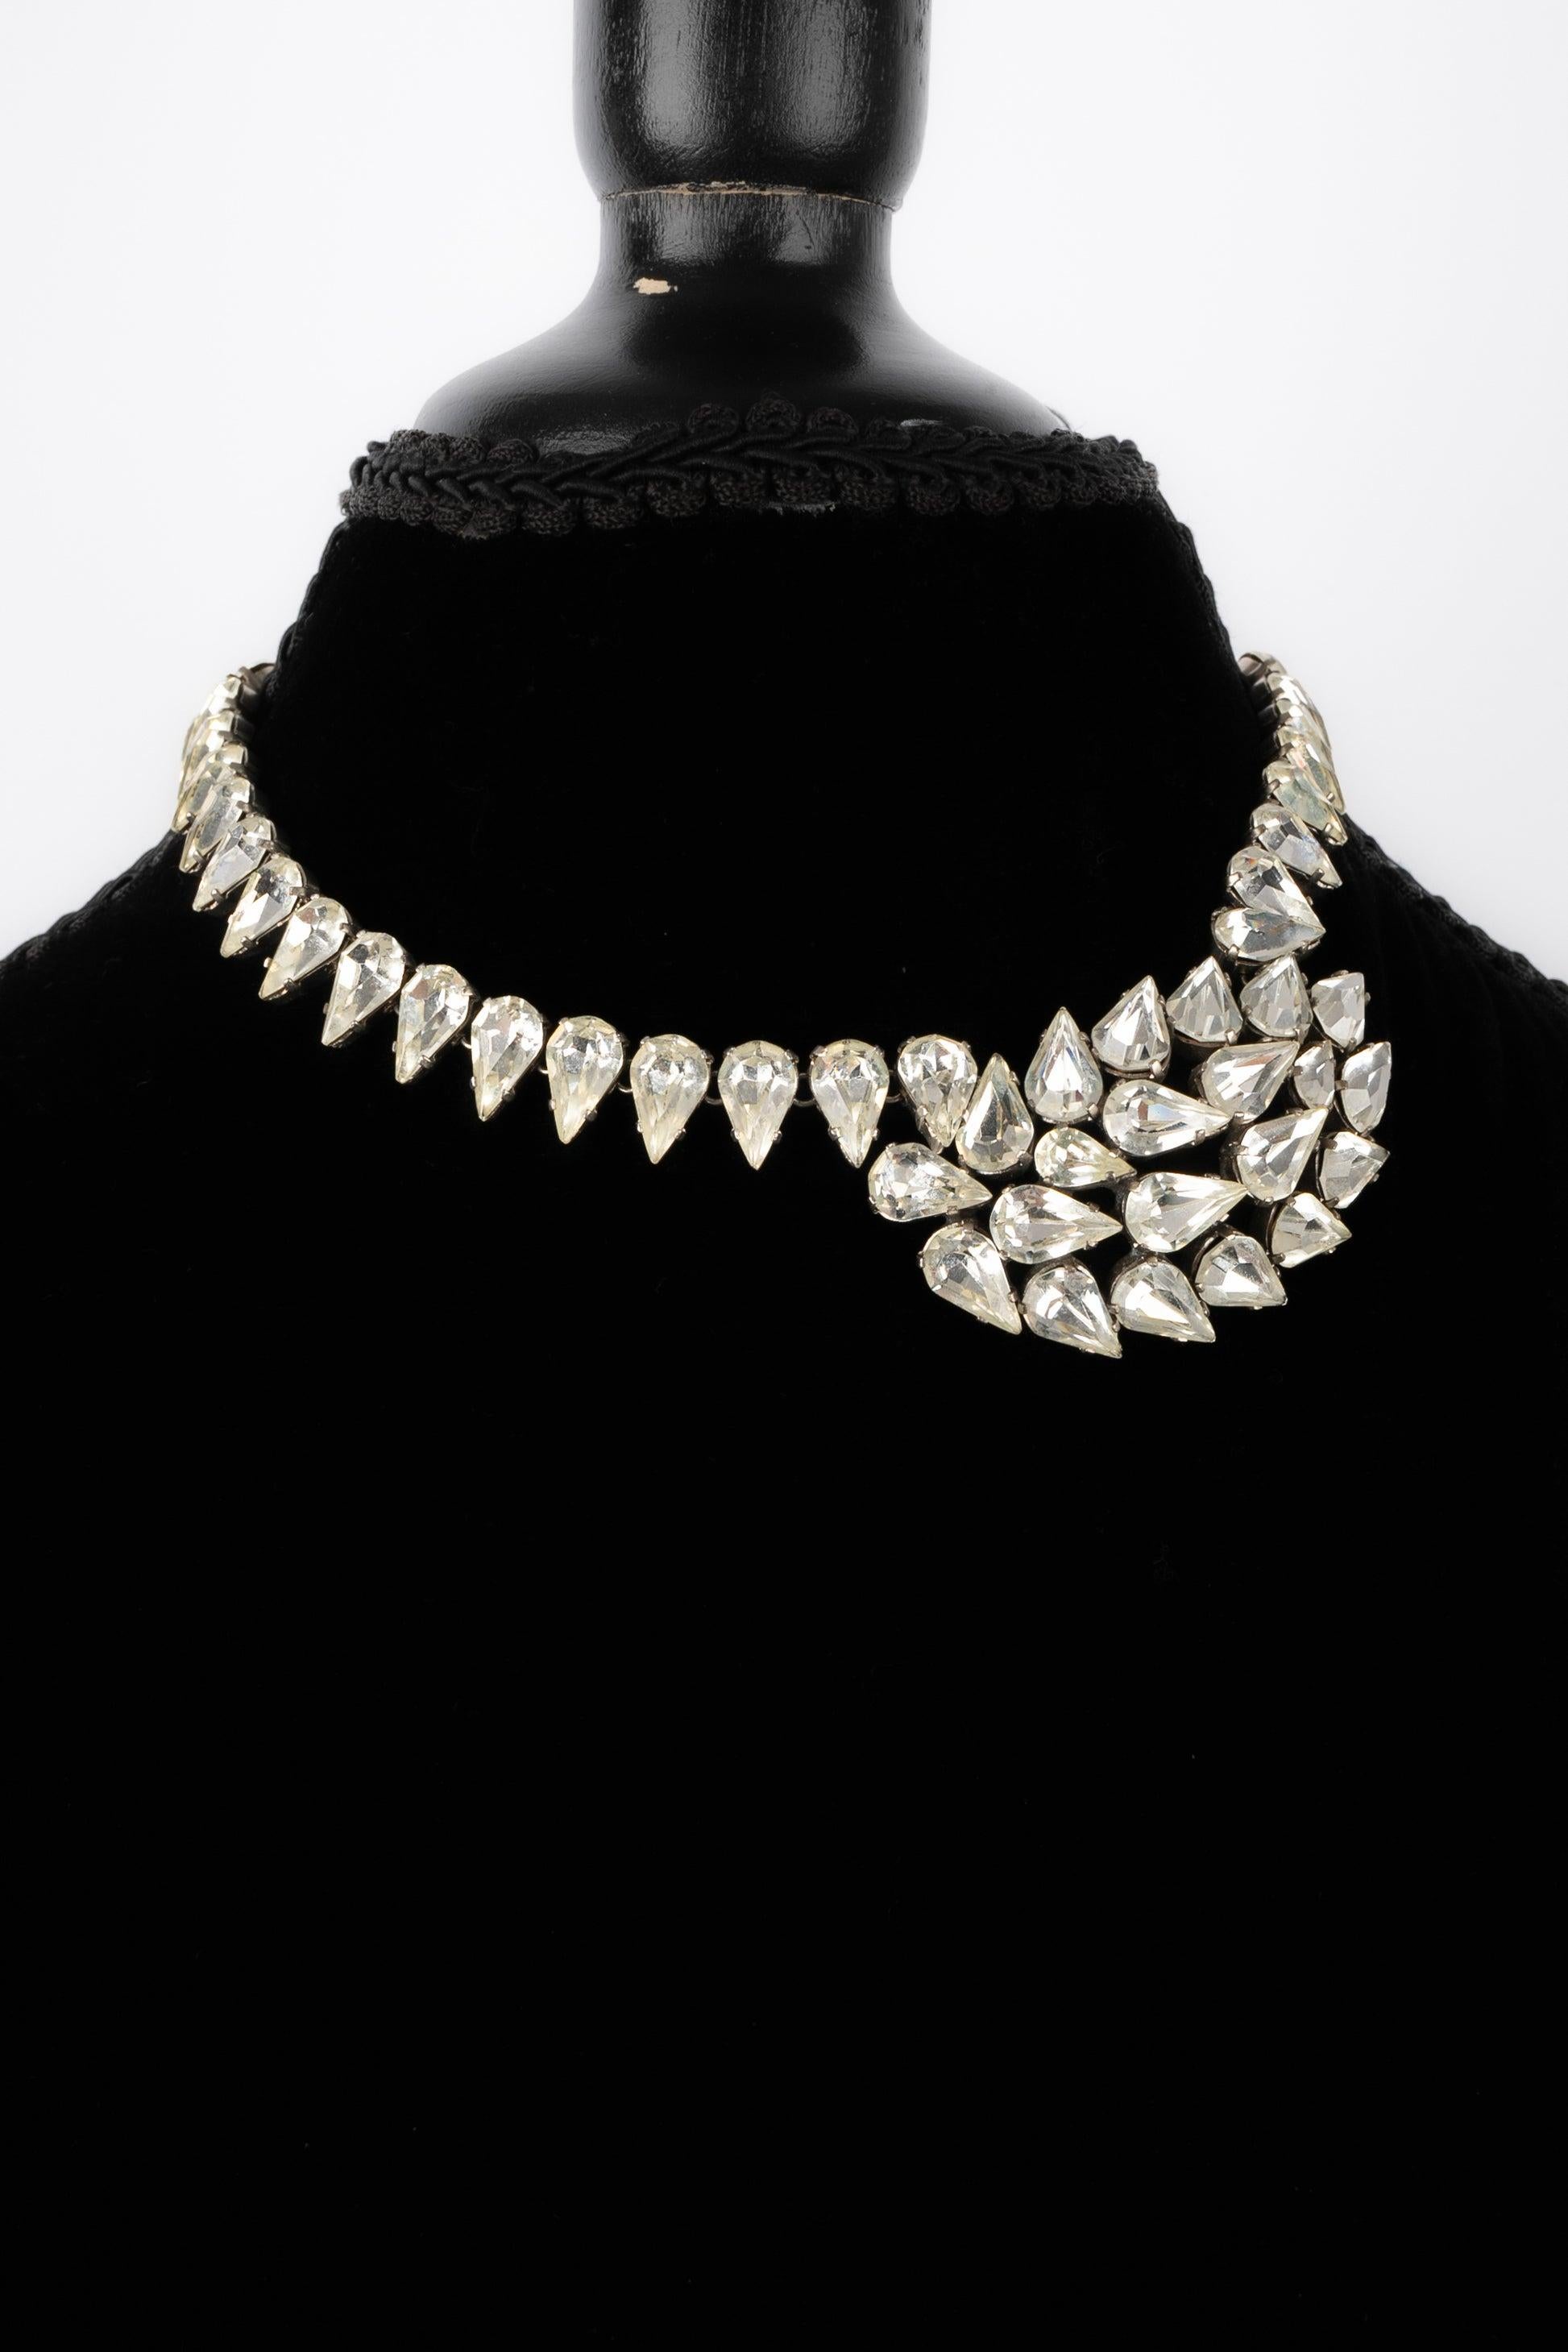 Women's Viintage Rhinestoned Necklace with Rhinestones For Sale